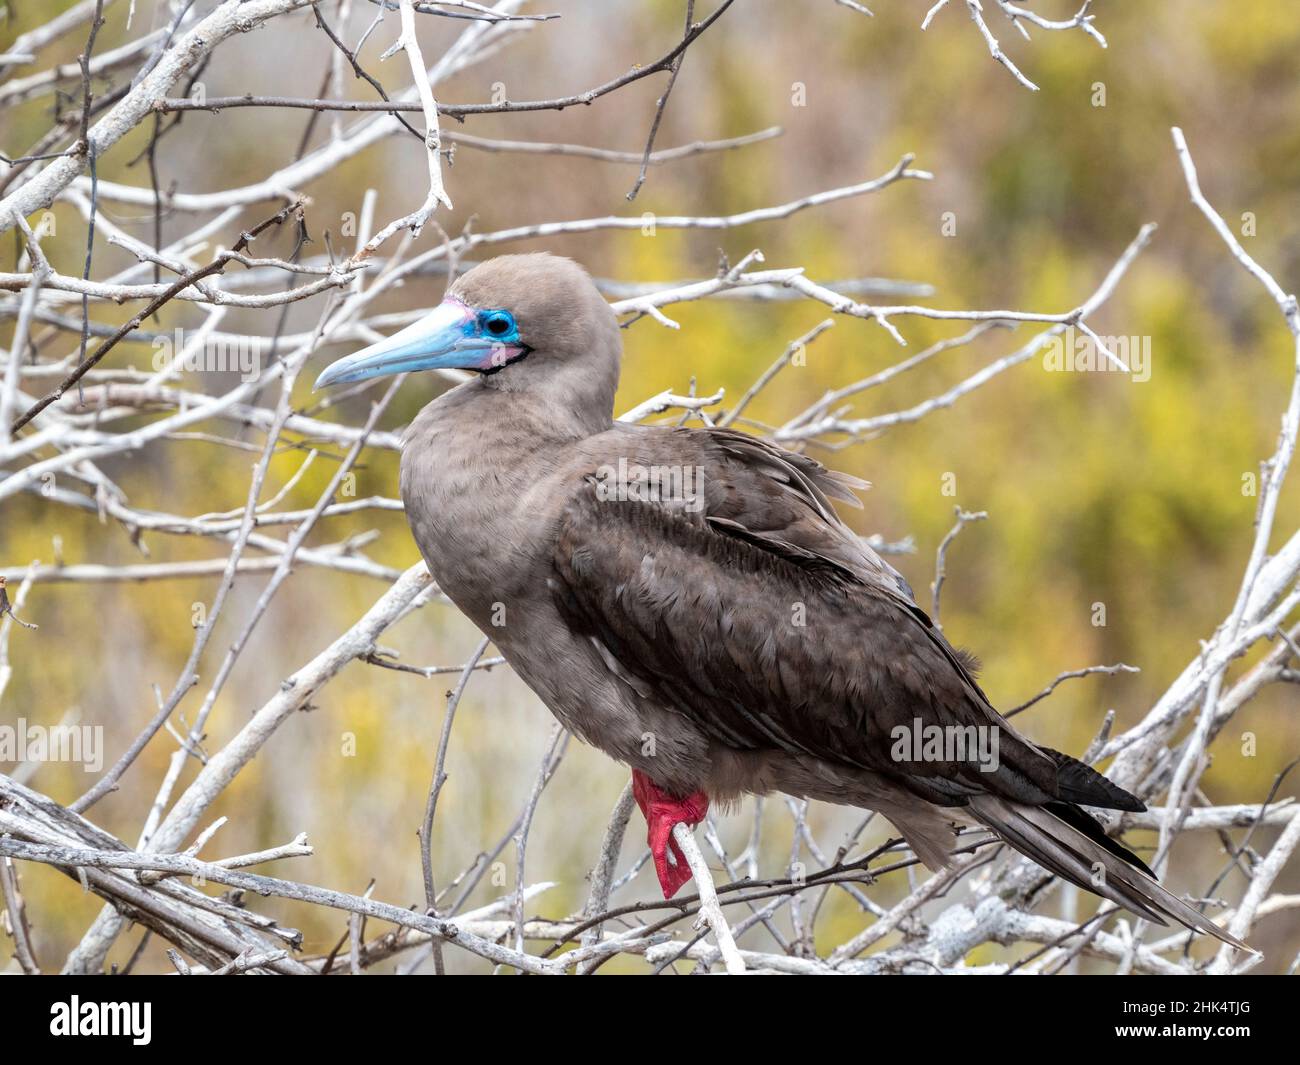 An adult red-footed booby (Sula sula), on the nest at Punta Pitt, San Cristobal Island, Galapagos, Ecuador, South America Stock Photo